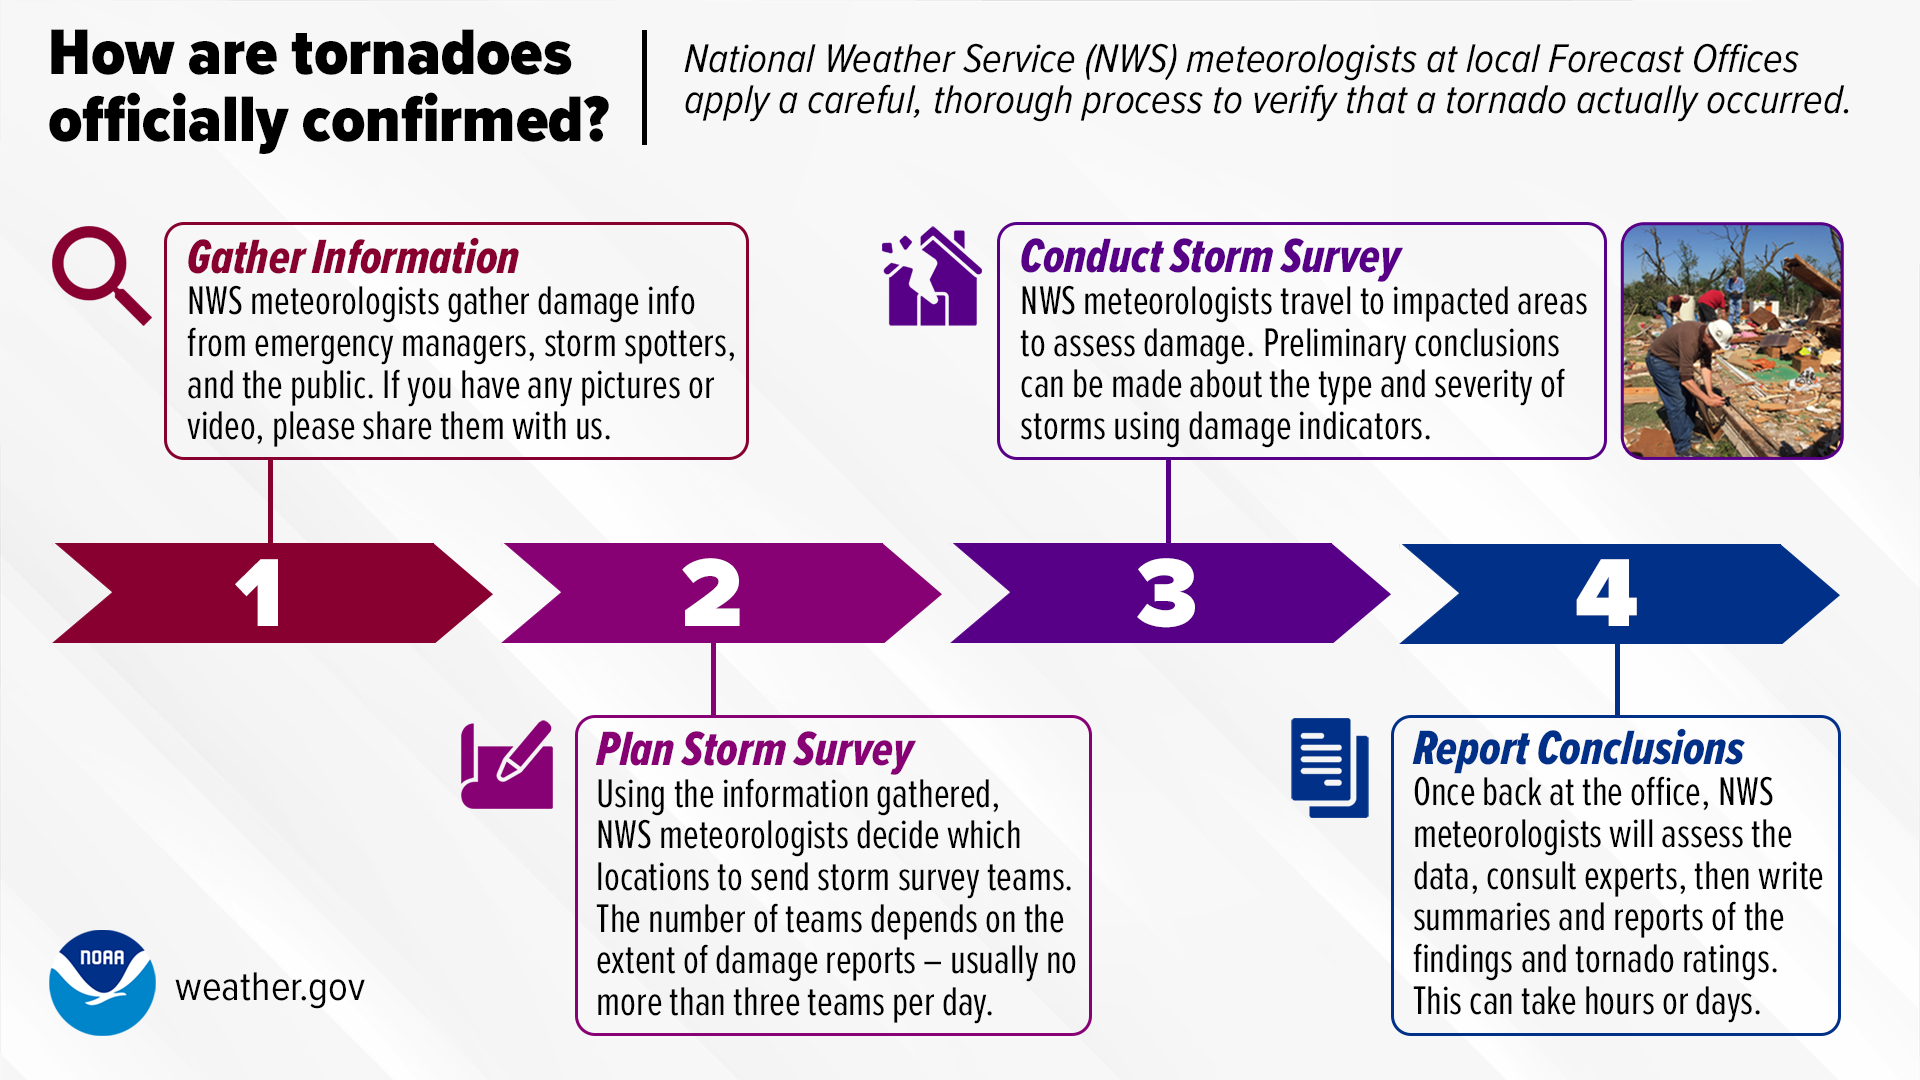 How are tornadoes officially confirmed? National Weather Service (NWS) meteorologists at local Forecast Offices apply a careful, thorough process to verify that a tornado actually occurred. Step 1: Gather Information. NWS meteorologists gather damage info from emergency managers, storm spotters, and the public. If you have any pictures or video, please share them with us. Step 2: Plan Storm Survey. Using the information gathered, NWS meteorologists decide which locations to send storm survey teams. The number of teams depends on the extent of damage reports - usually no more than three teams per day. Step 3. Conduct Storm Survey. NWS meteorologists travel to impacted areas to assess damage. Preliminary conclusions can be made about the type and severity of storms using damage indicators. Step 4: Report Conclusions. Once back at the office, NWS meteorologists will assess the data, consult experts, then write summaries and reports of findings. This process can take hours or days.